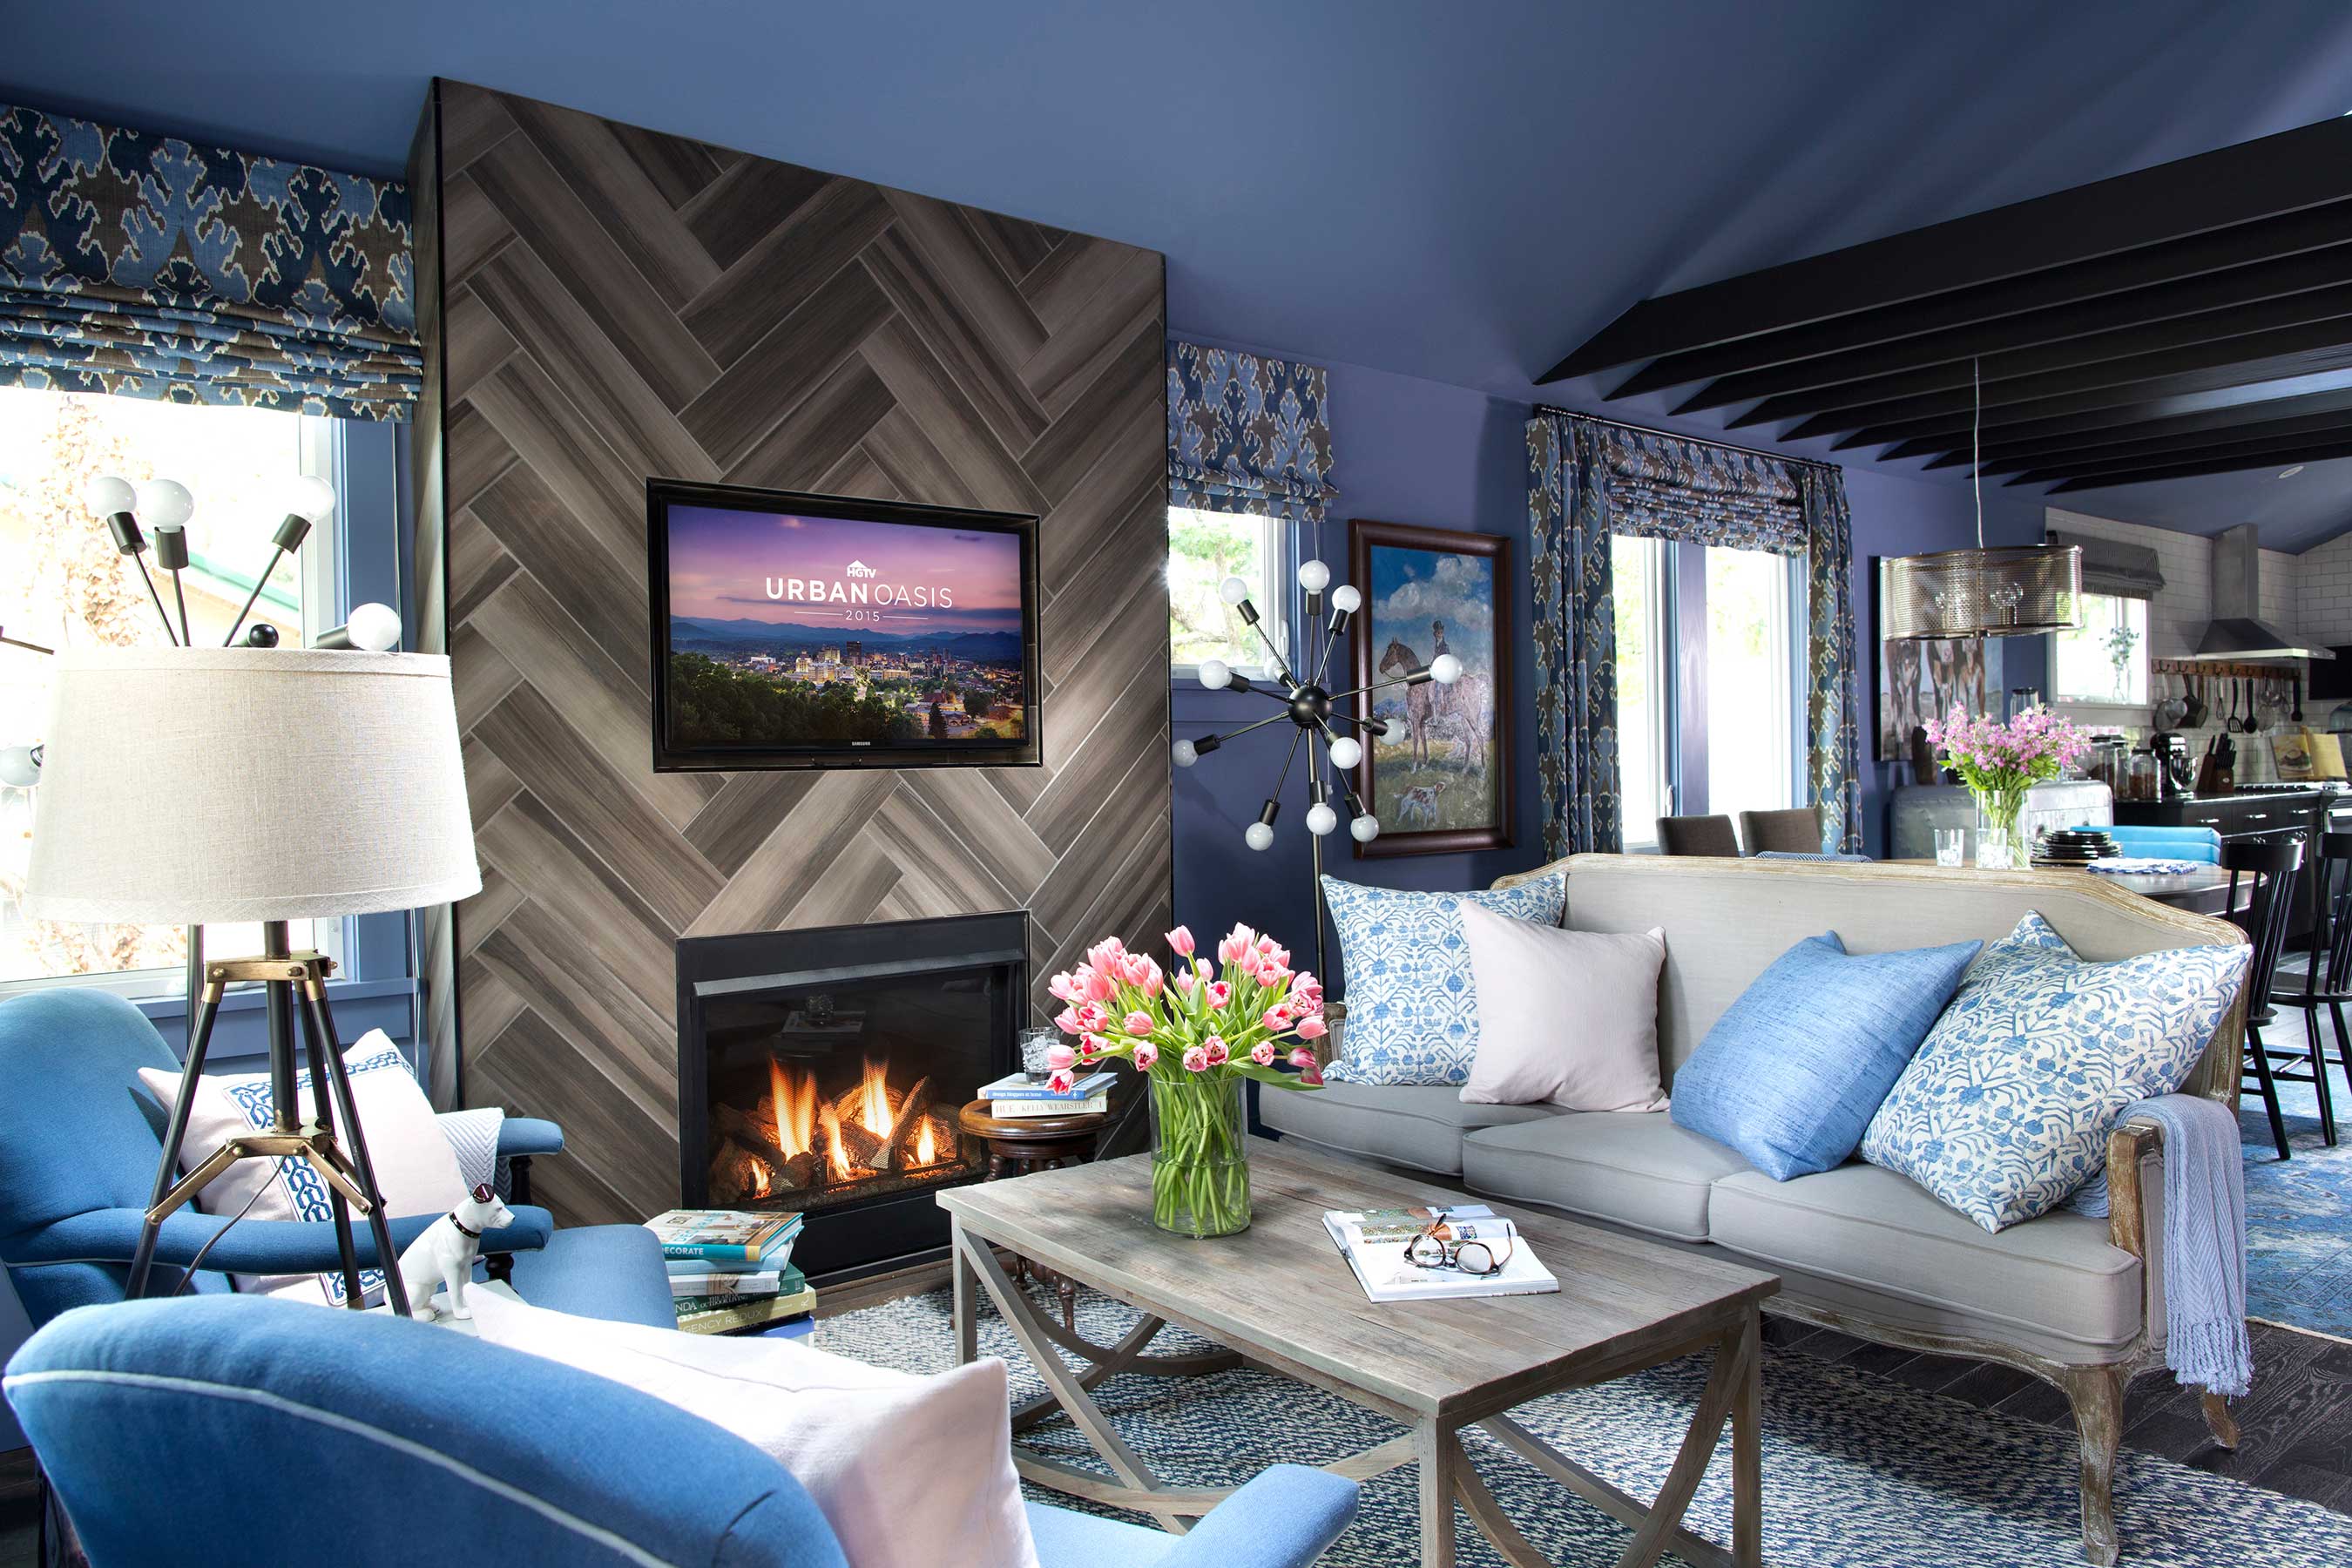 Inside the front door of the HGTV Urban Oasis, the dramatic blue-gray walls and comfortable seating are centered around a ceiling-high fireplace set in a beautiful herringbone-patterned tile.